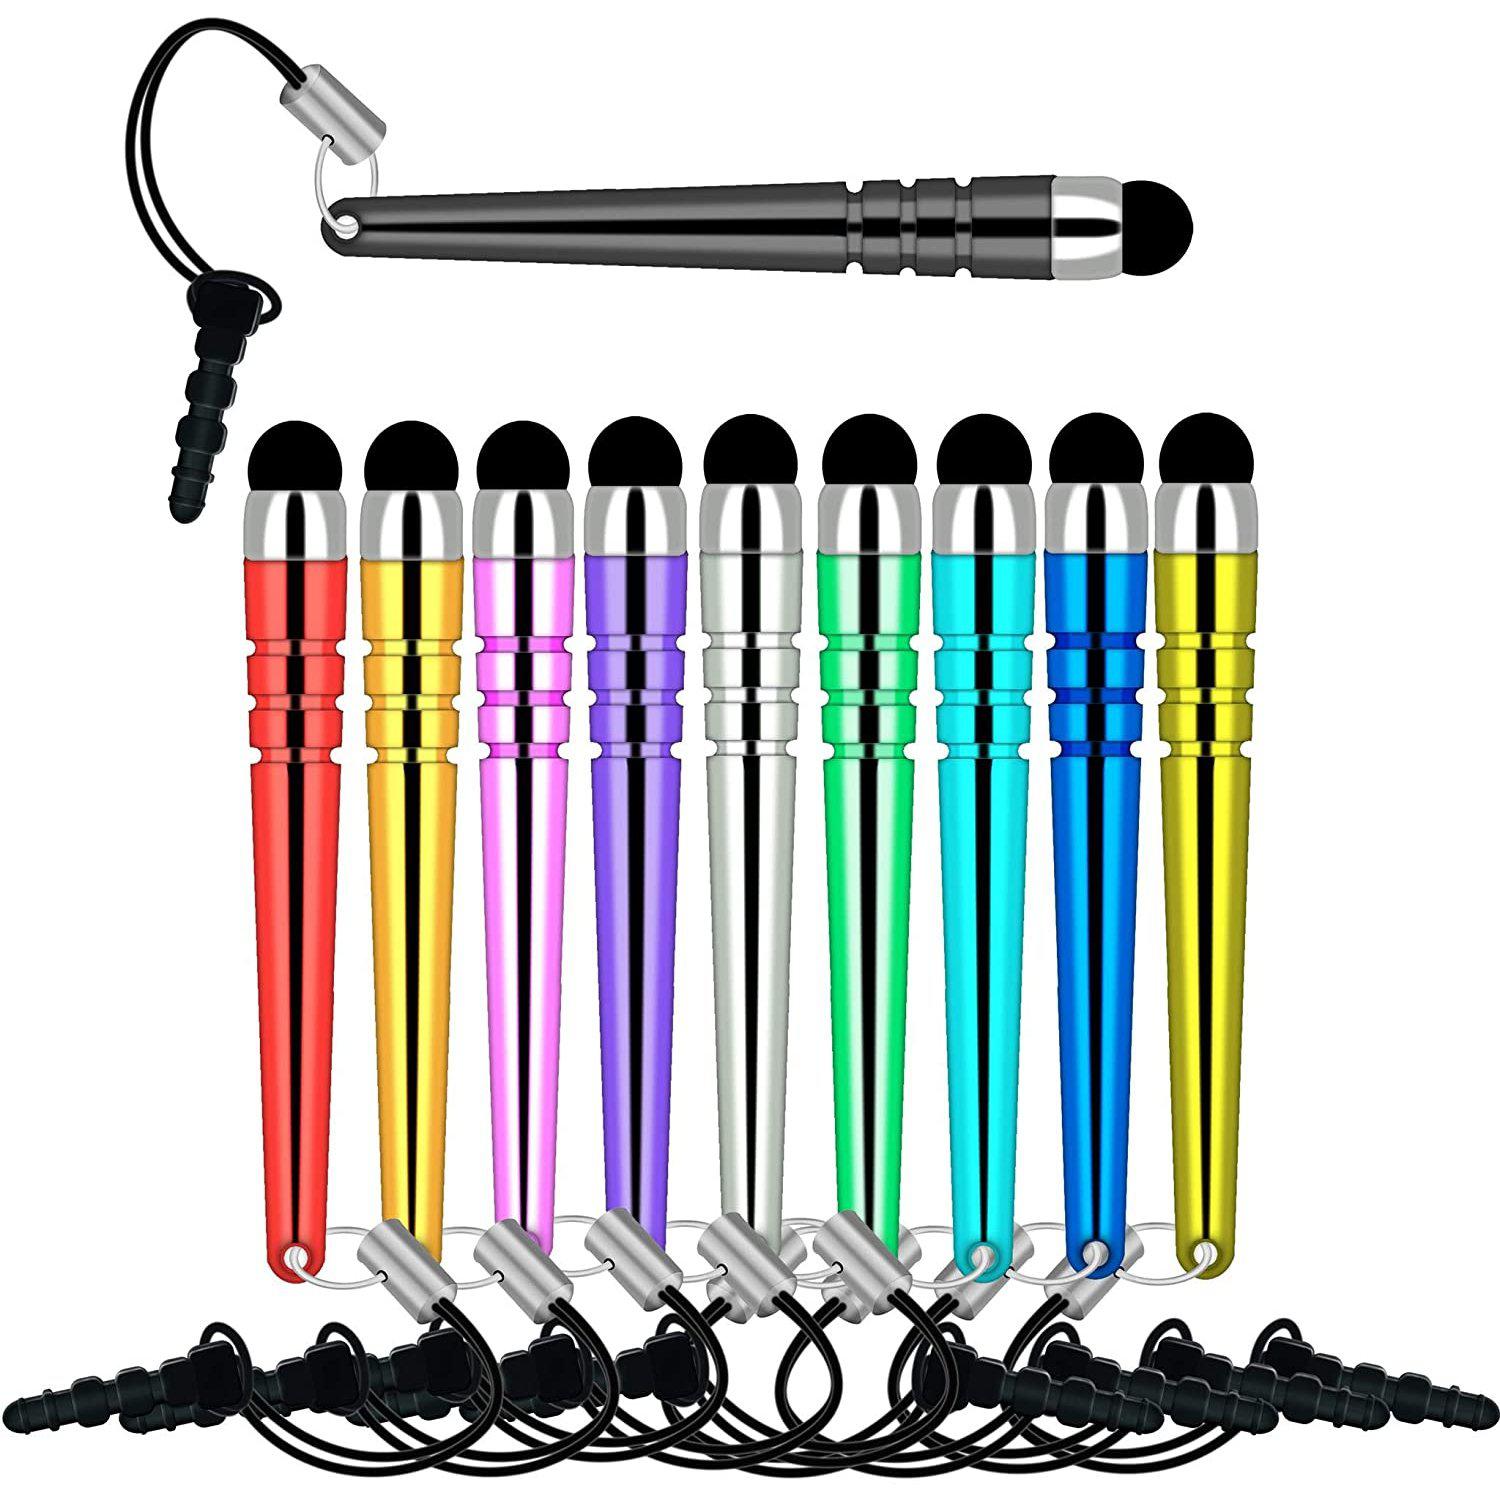 iSOUL Premium Quality 10 Pack Stylus Touch Pen With Anti-Dust Plug Cap IS-ST-984.